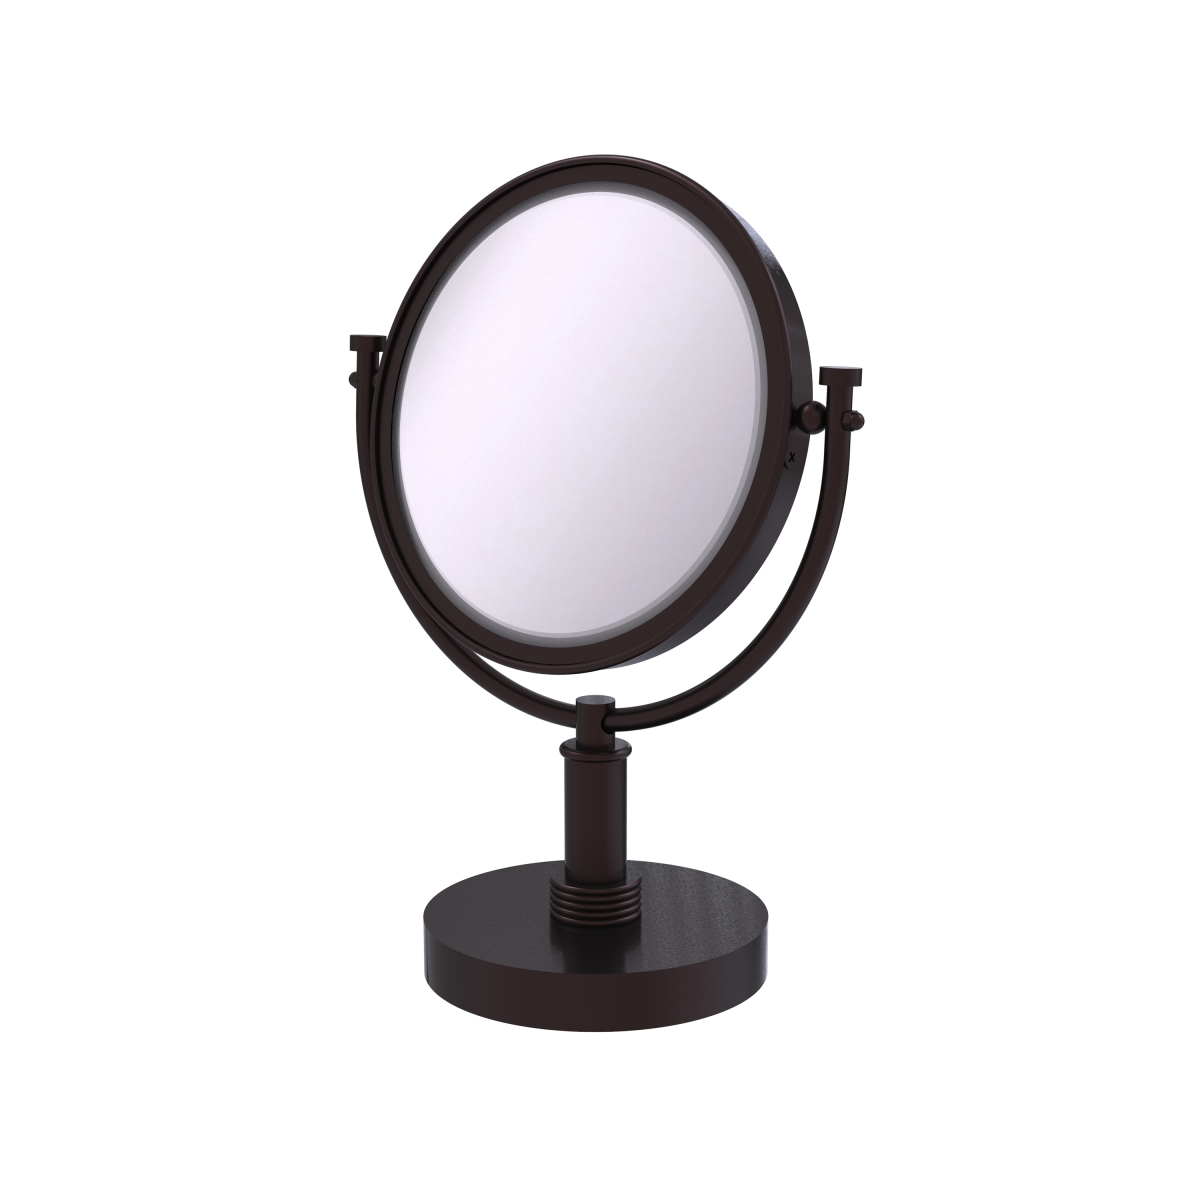 Dm-4g-3x-abz Grooved Ring Style 8 In. Vanity Top Make-up Mirror 3x Magnification, Antique Bronze